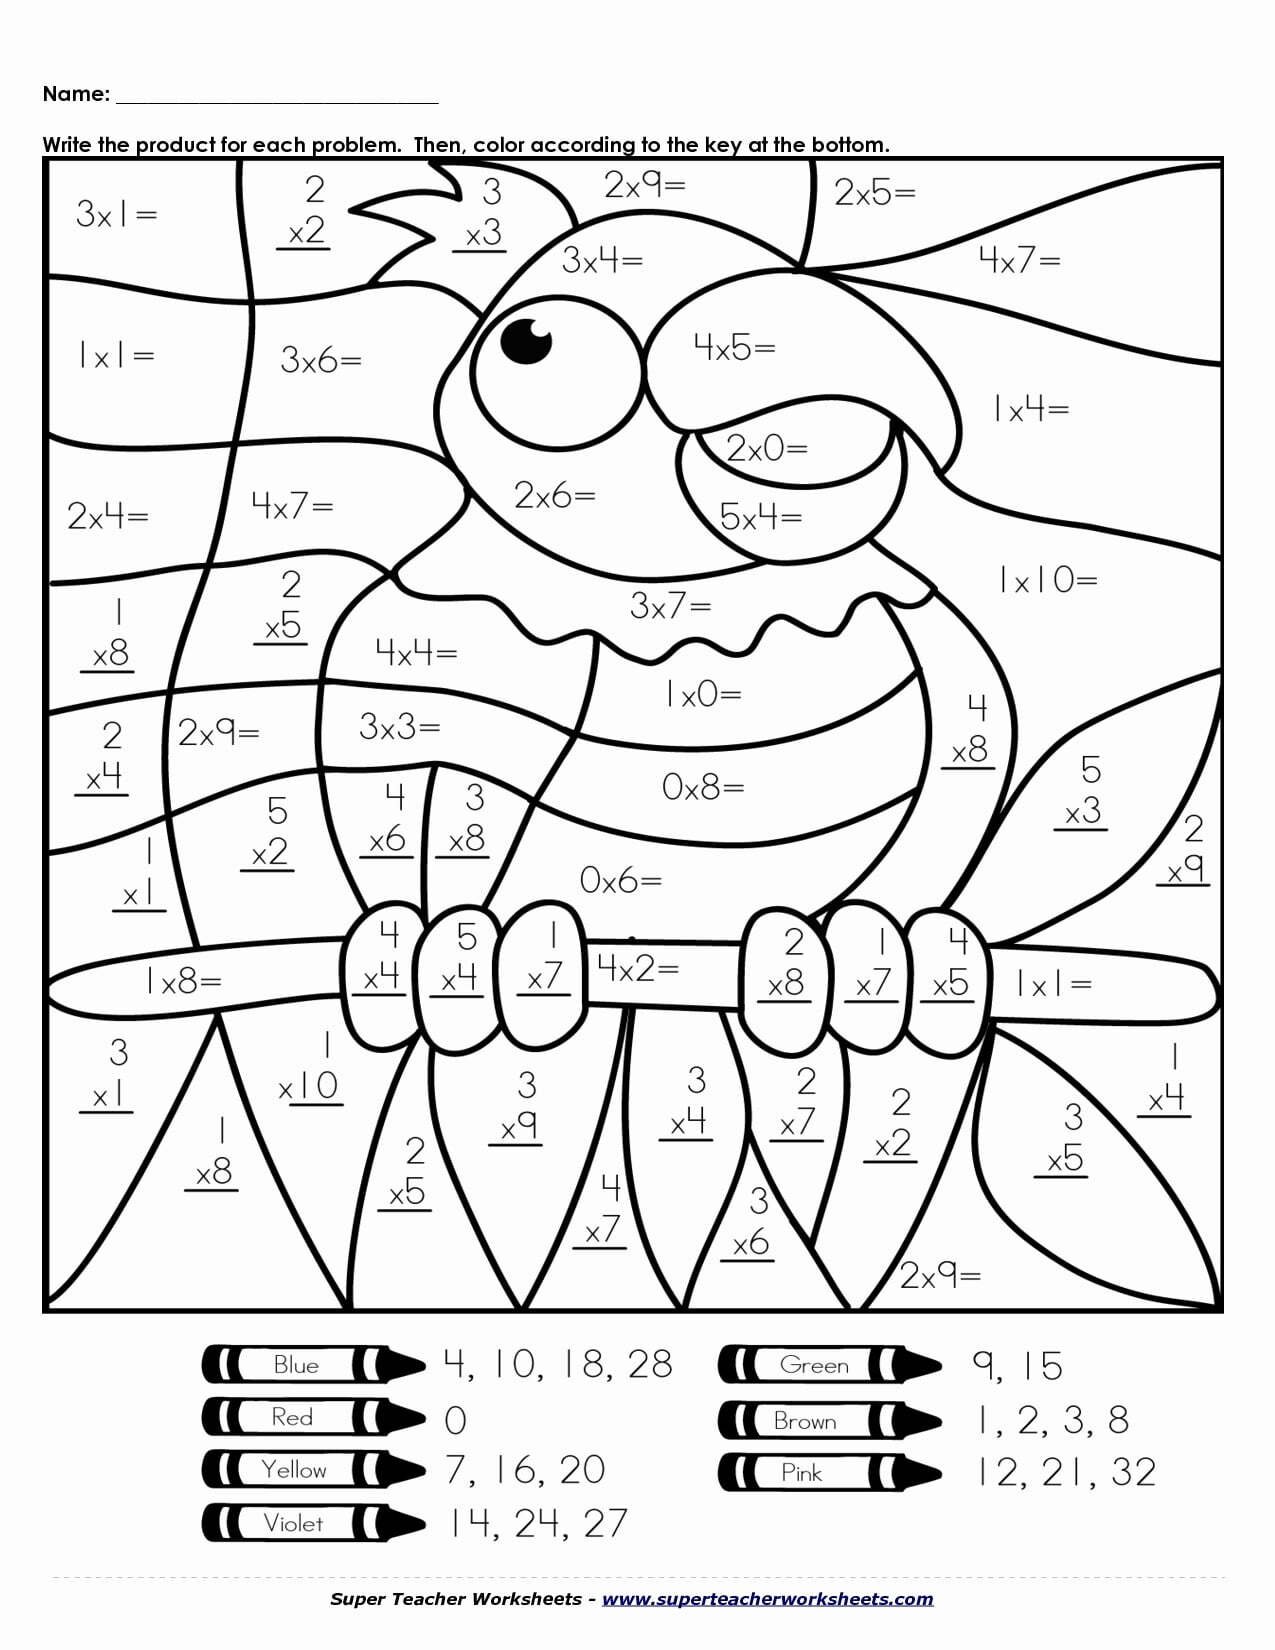 2nd-grade-color-by-number-worksheets-worksheetscity